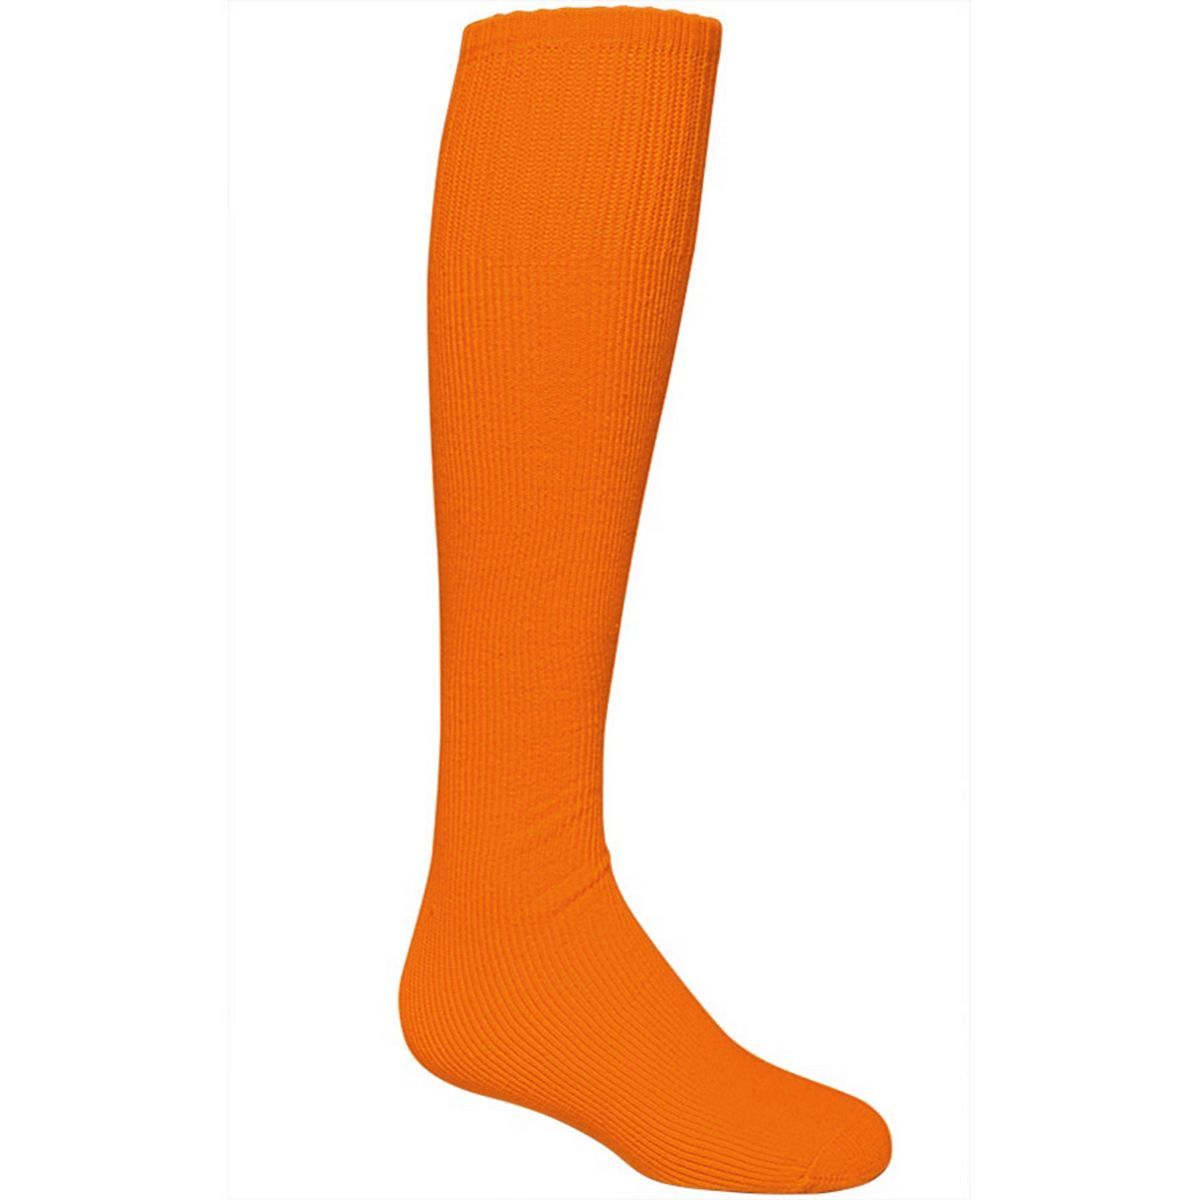 High 5 Athletic  Sock in Orange  -Part of the Accessories, High5-Products, Accessories-Socks product lines at KanaleyCreations.com